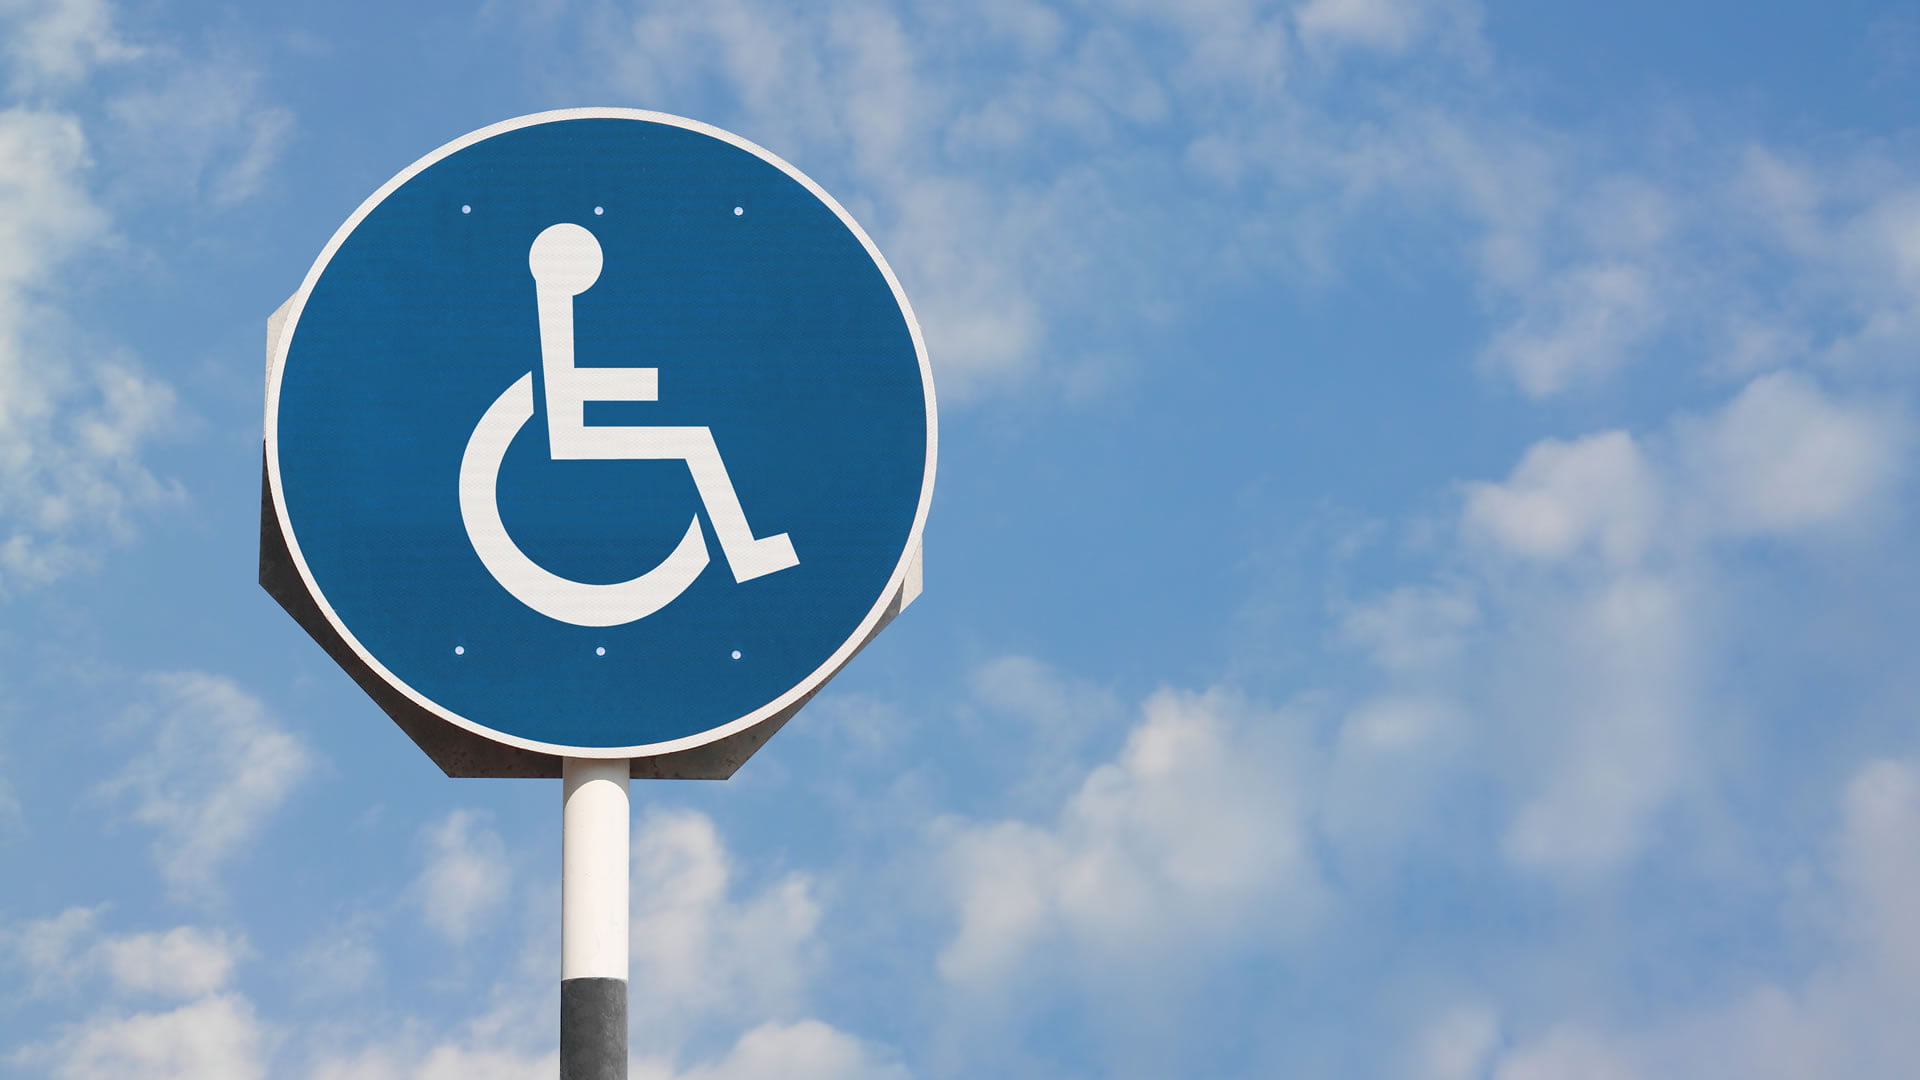 Ryanair contact telephone number for passengers with disabilities or reduced mobility